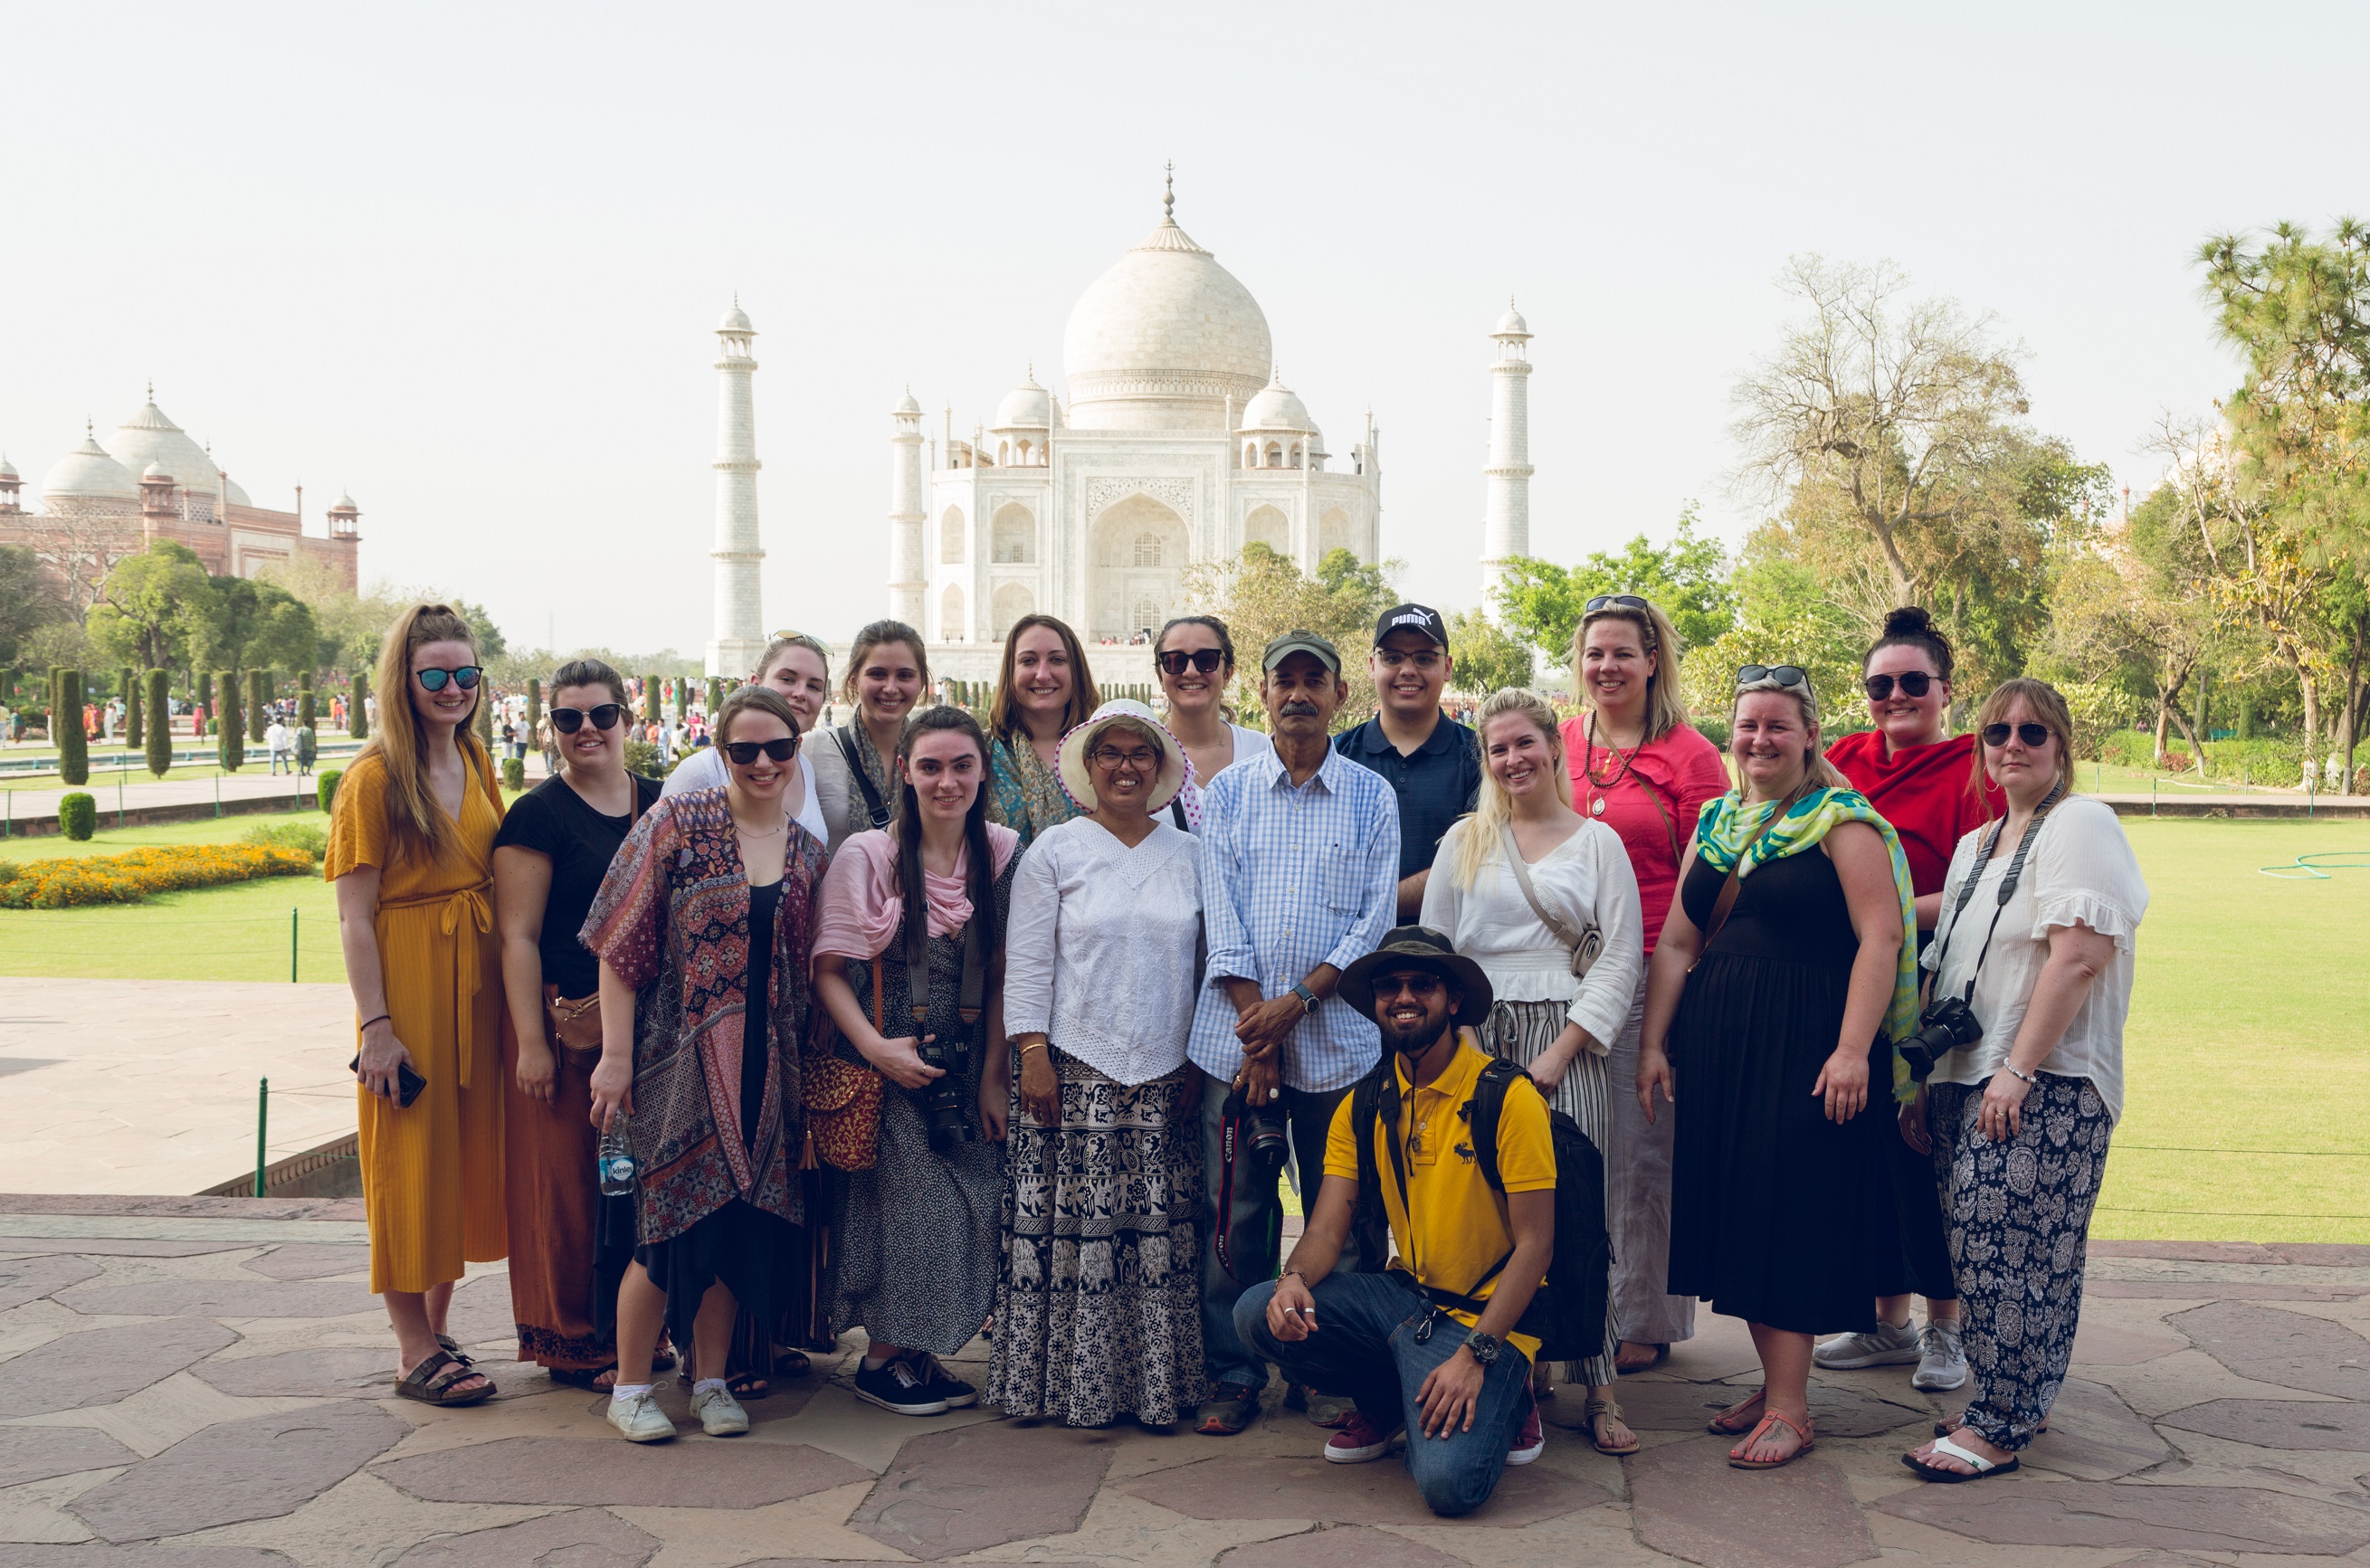 students, faculty and staff in front of Taj Mahal, India